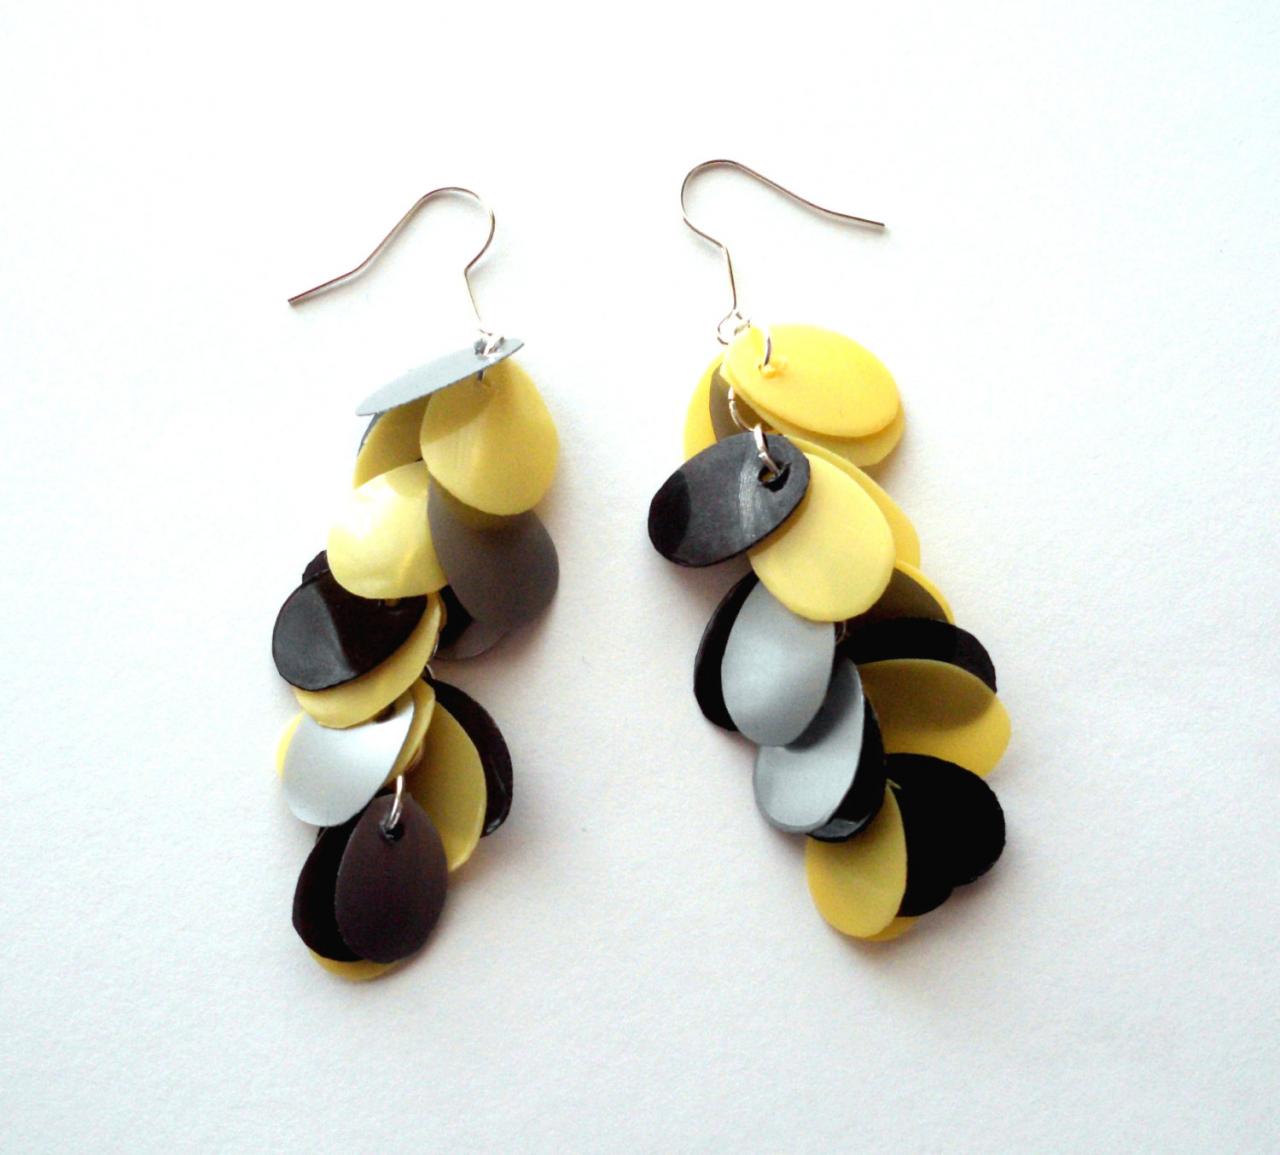 Upcycled Jewelry Handmade Long Earrings From Recycled Plastic Bottles Yellow Black & Grey